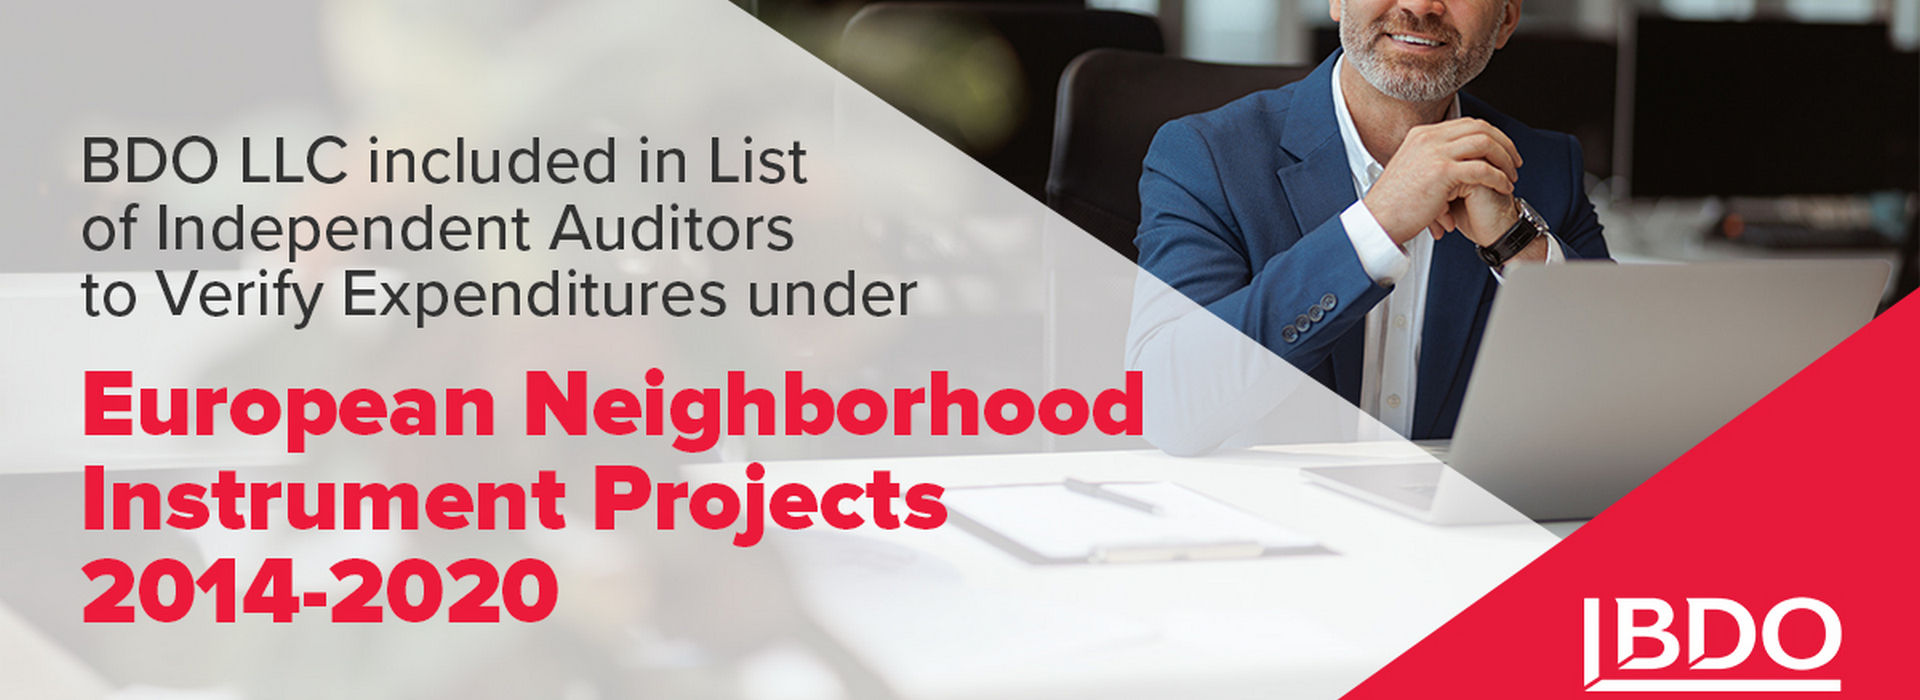 BDO LLC Included in List of Independent Auditors to Verify Expenditures Under European Neighborhood Instrument Projects 2014-2020